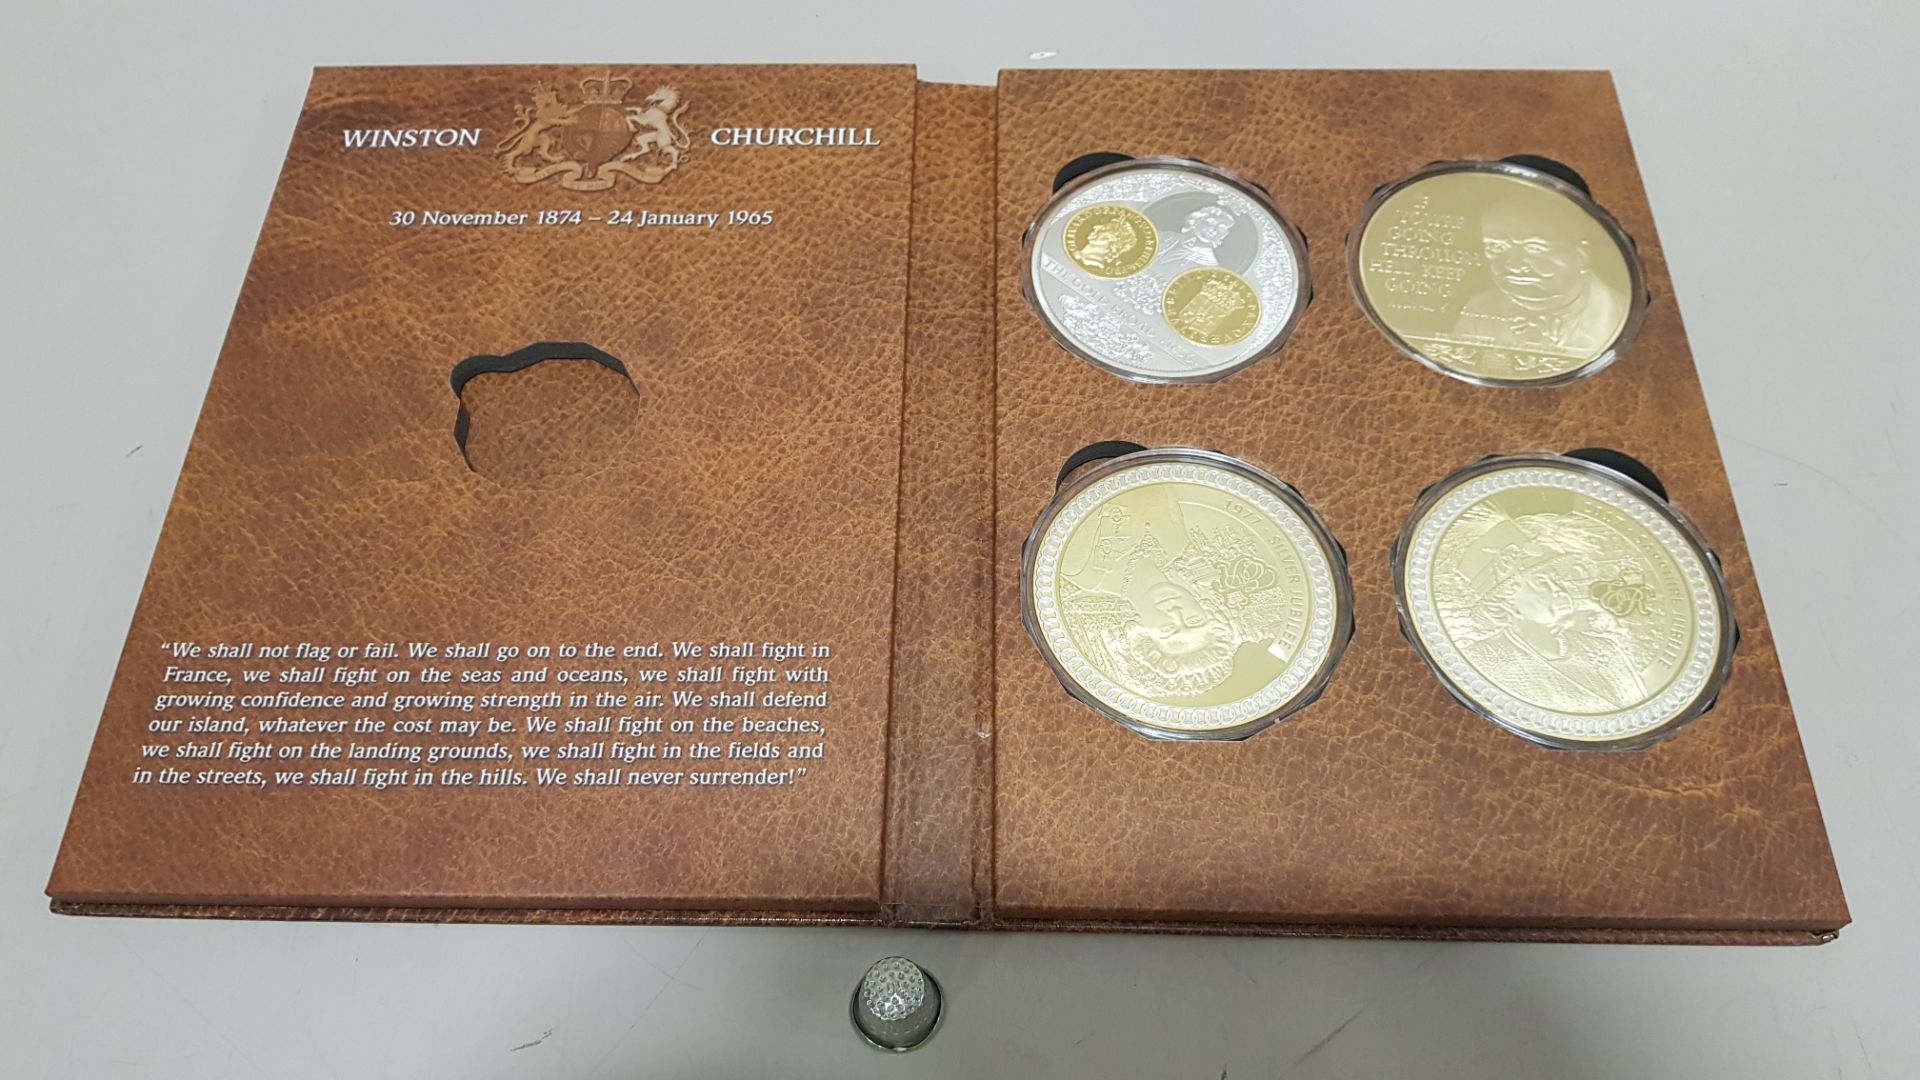 PART COLLECTION COMPRISING 4 LARGE COMMEMORATIVE COINS WINSTON CHURCHILL 30TH NOVEMBER - 24TH